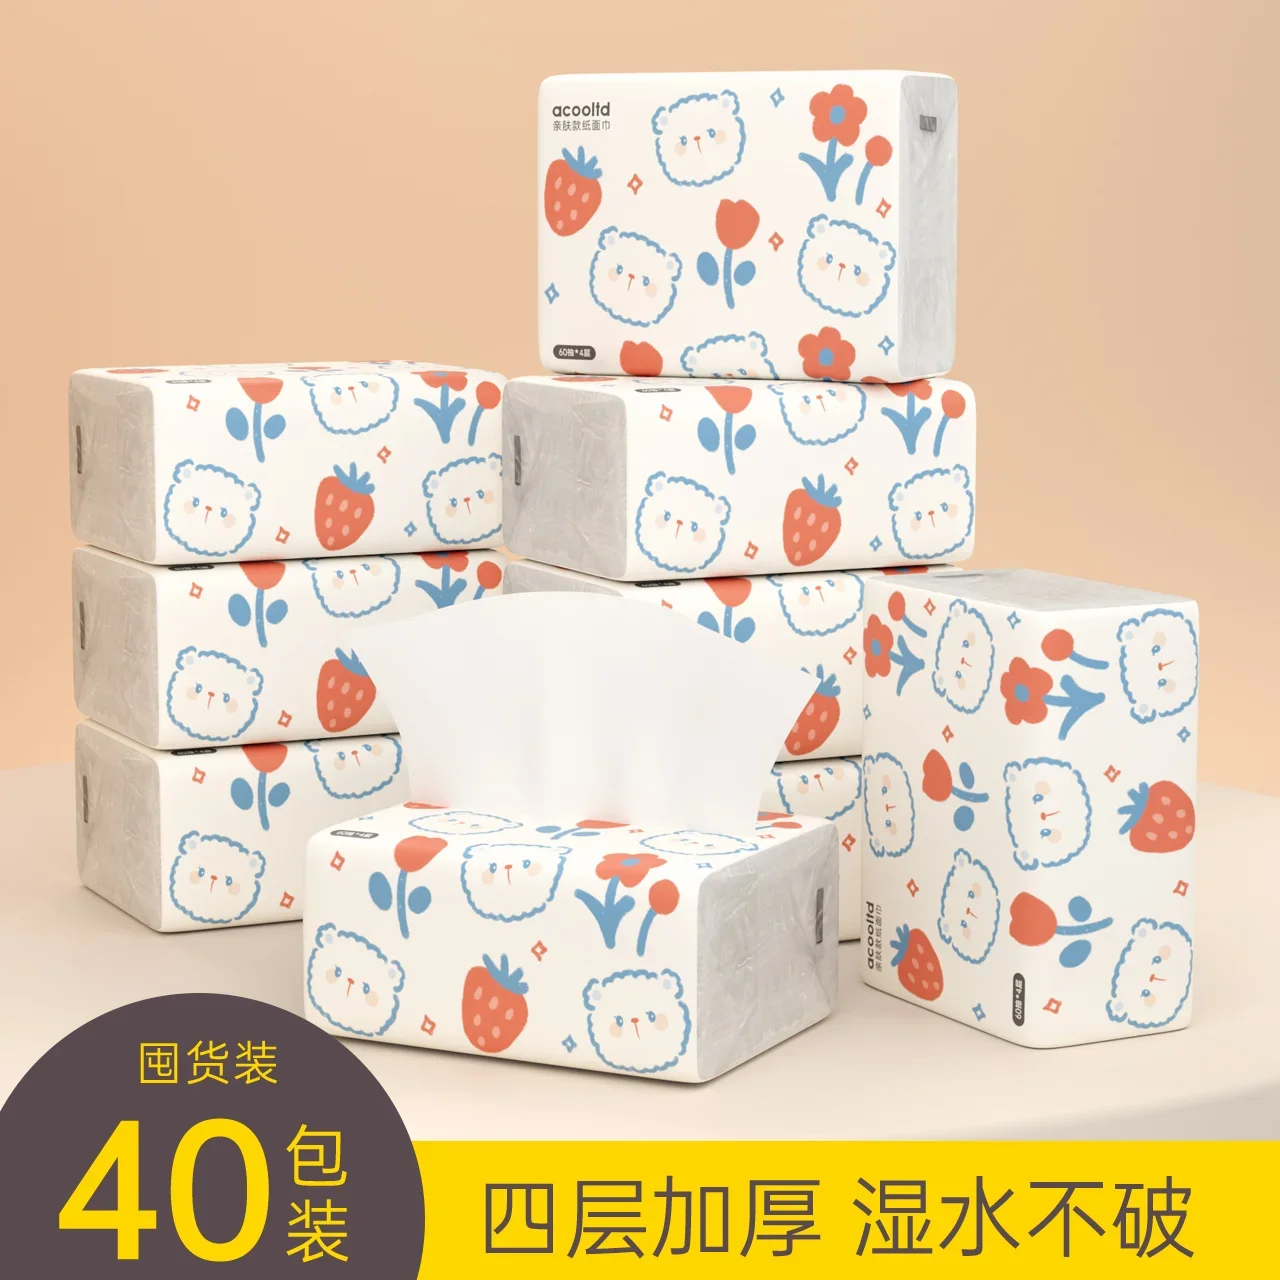 40/12 Packs Paper Extraction Large Packs Full Box Household Tissue Affordable Family Pack Napkin Hand-Wiping Facial Tissue Pumping